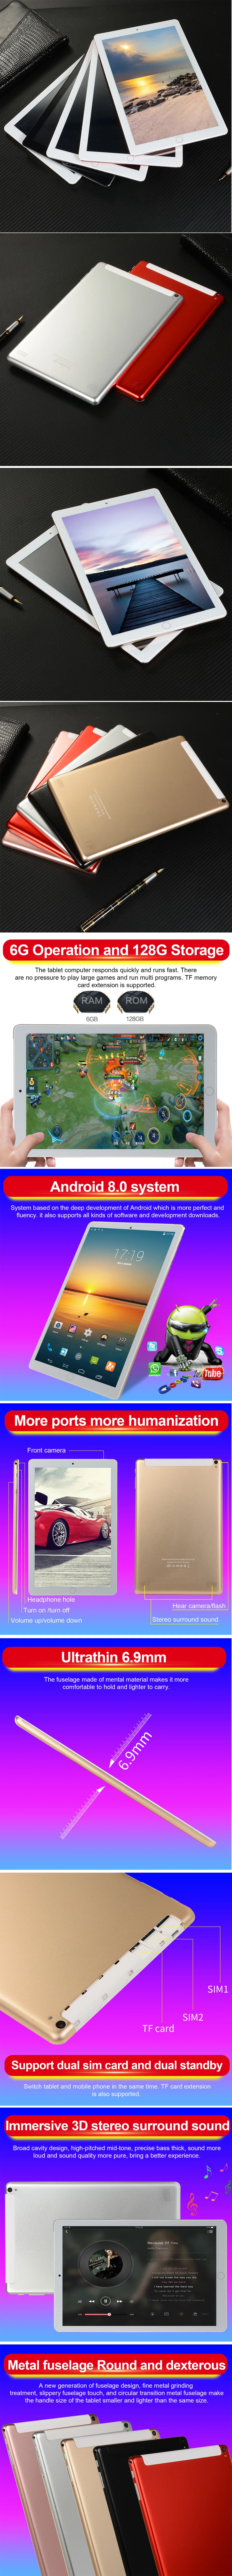 cheap samsung tablet Hot Sale 6G+128GB Android 9.0 Tablet Phone Full Netcom Two-in-one Stimulates Eating Chicken 4G 10.1 Inch Call Support Zoom note taking tablet with pen